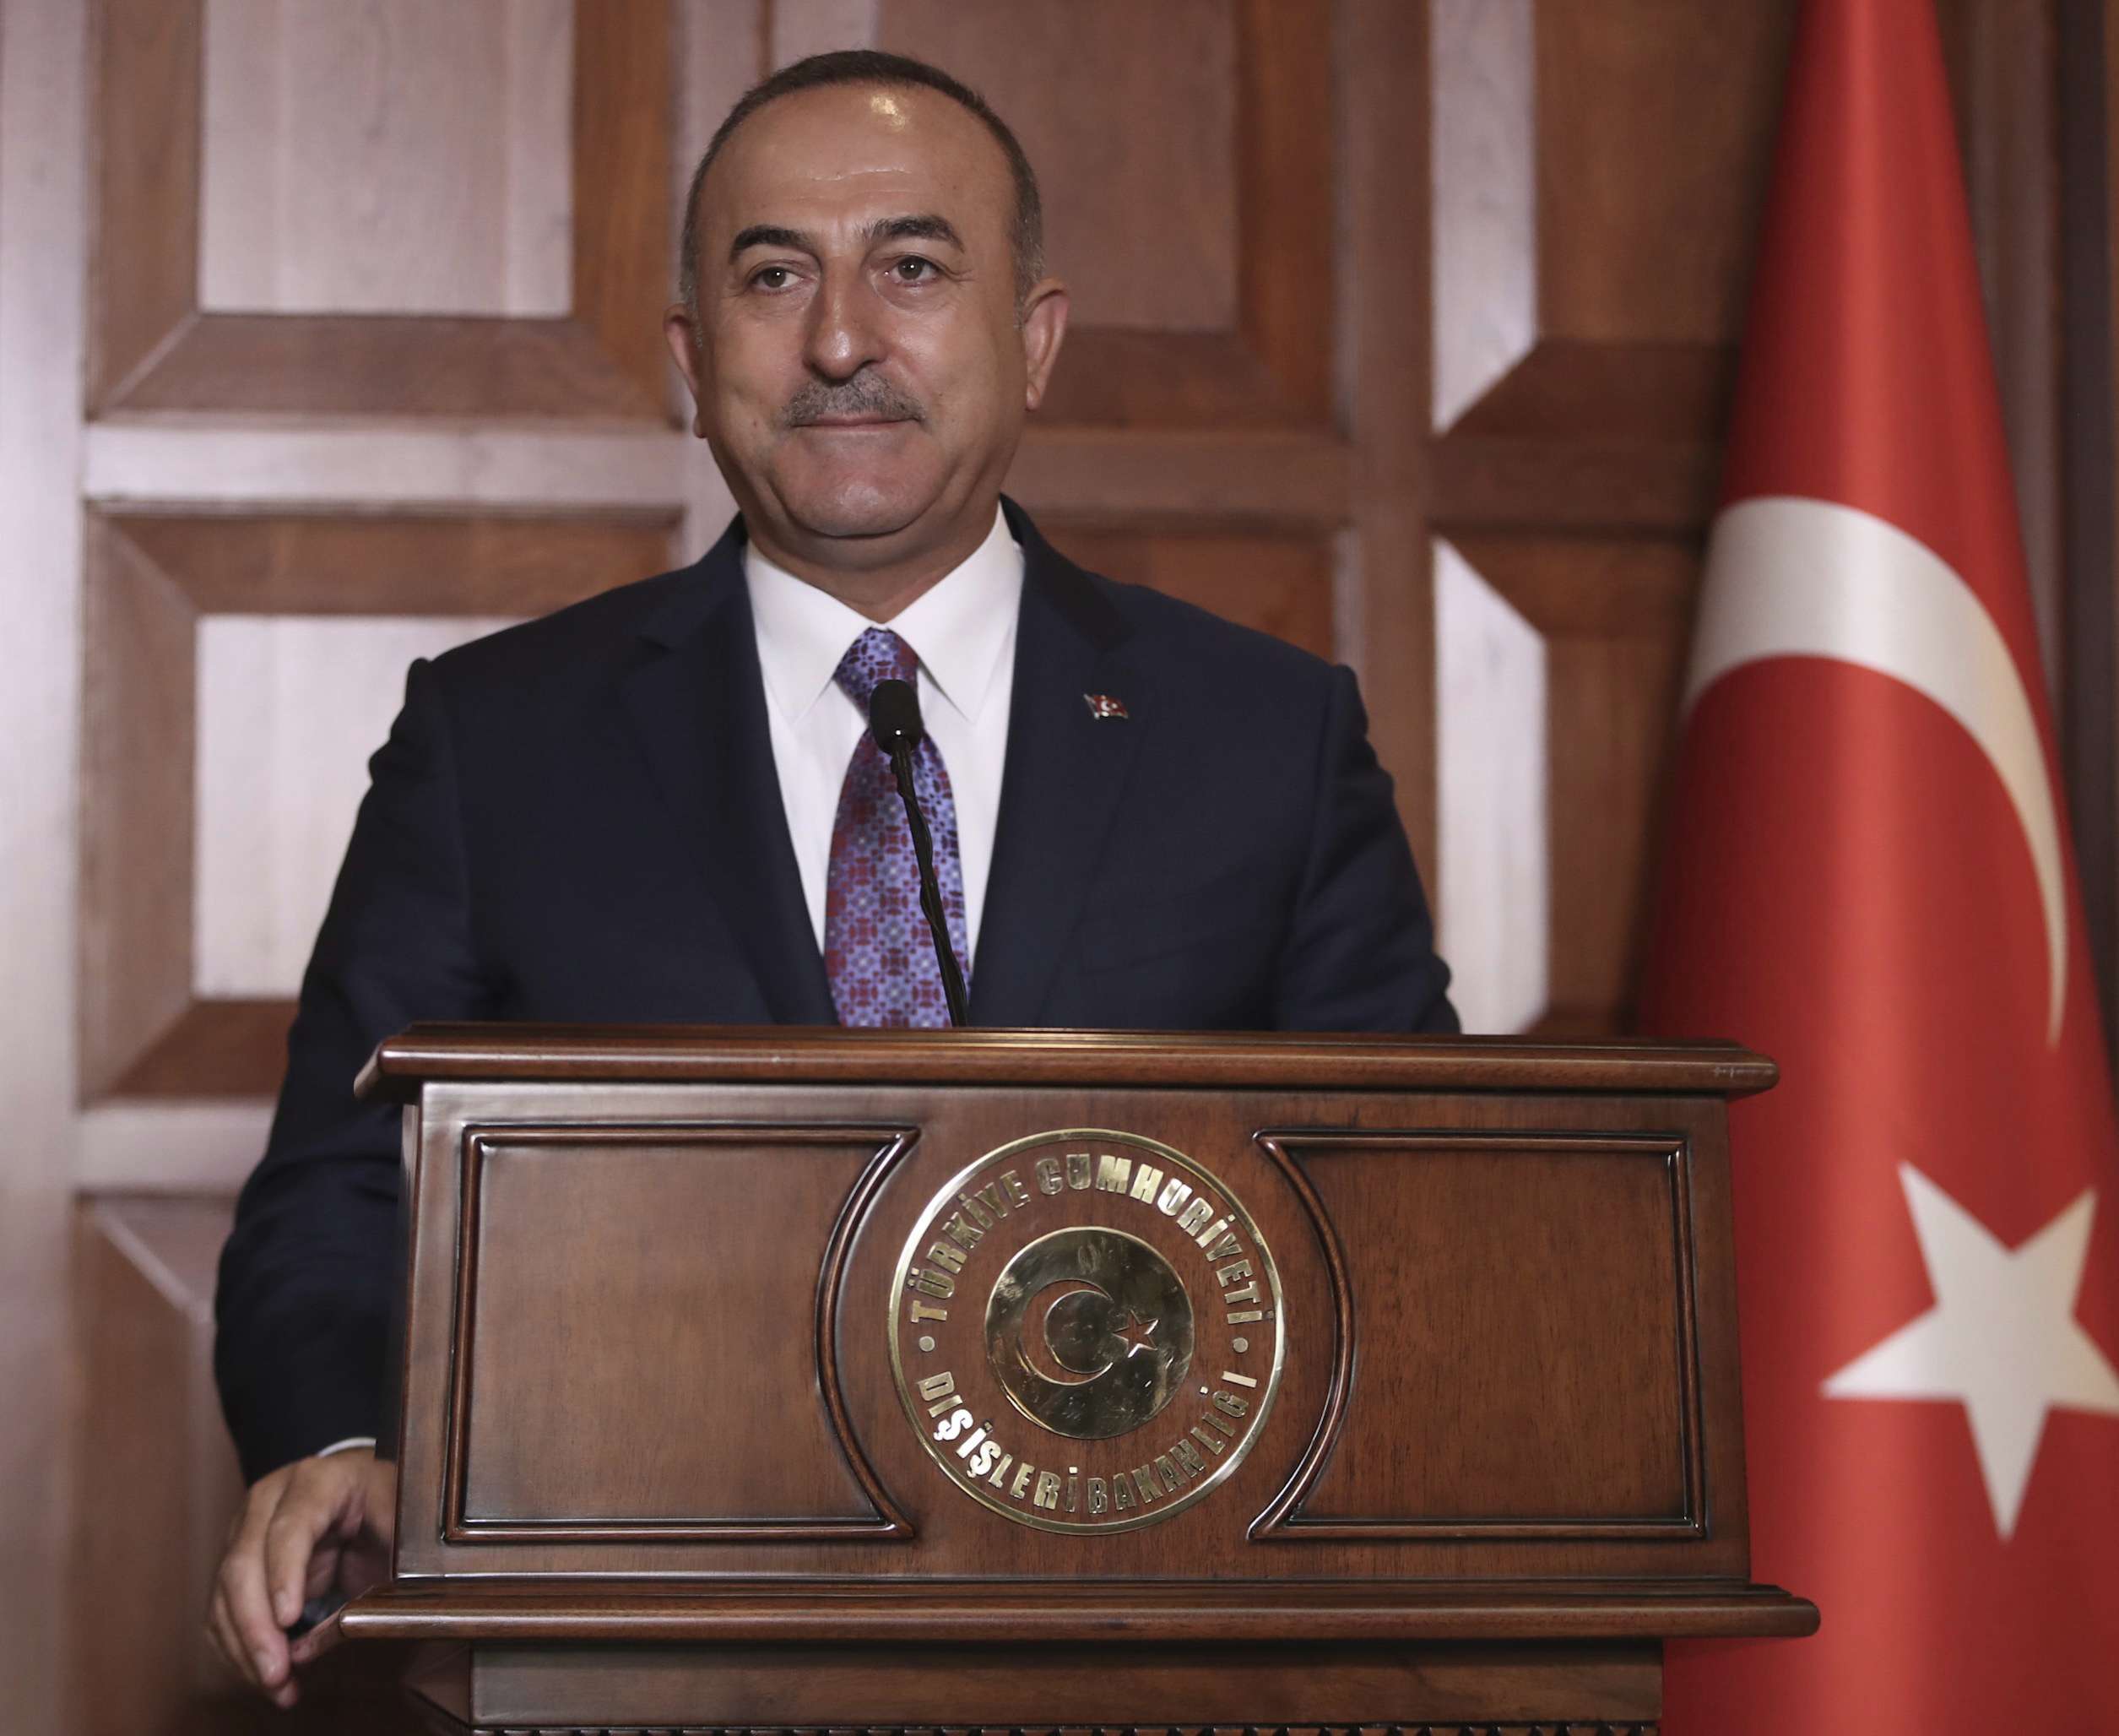 "There have been some joint patrols, yes, but steps taken beyond that... are only cosmetic," Foreign Minister Mevlut Cavusoglu told reporters